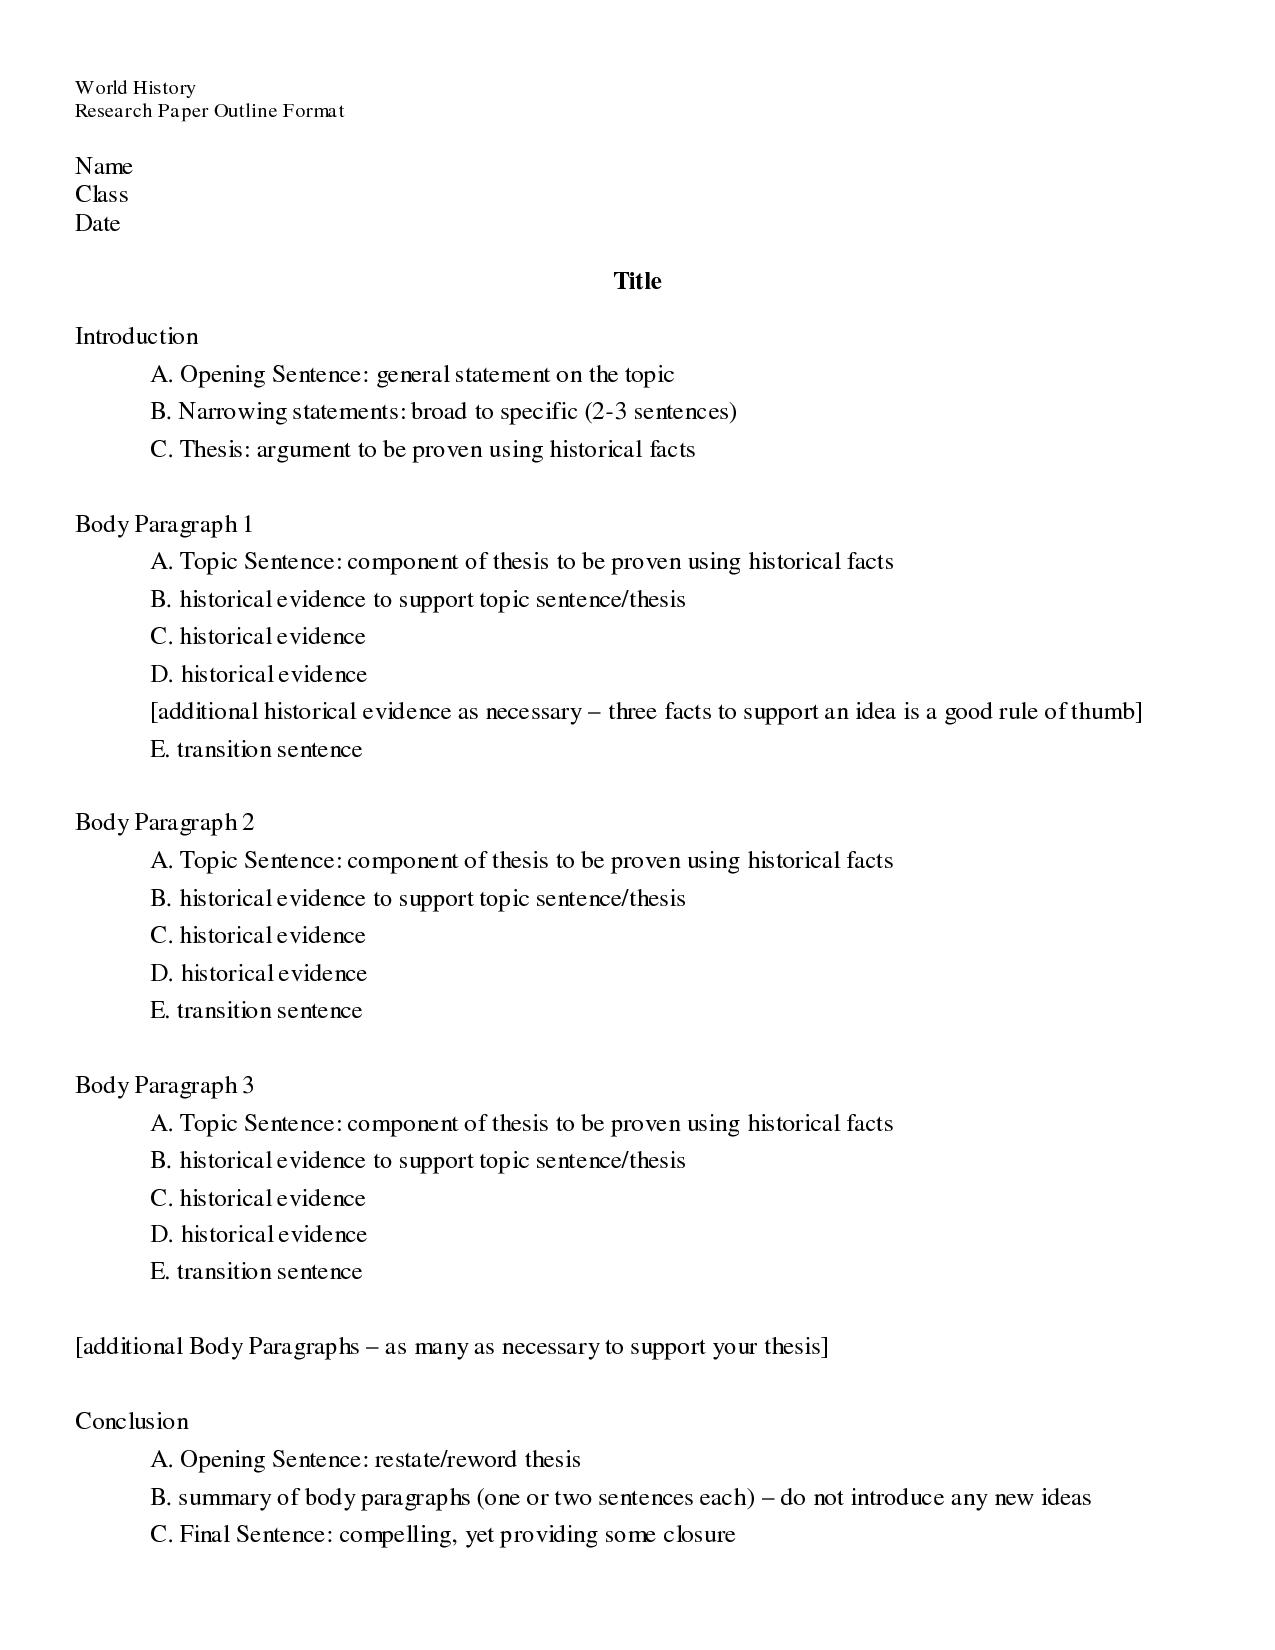 Sample research paper outline person